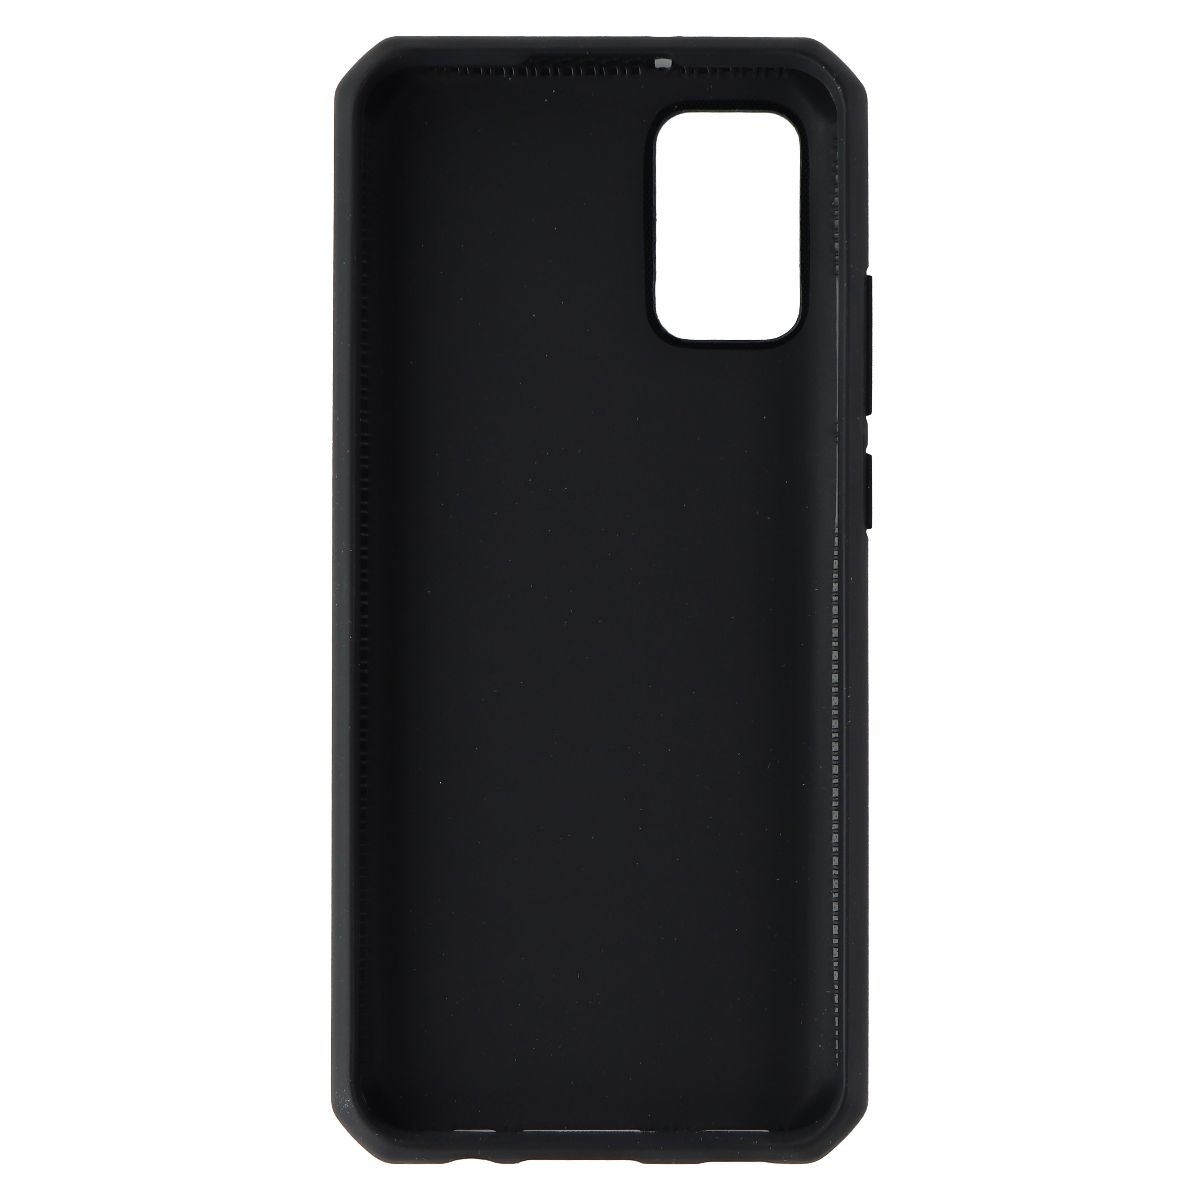 ITSKINS Spectrum Solid Series Case For Samsung Galaxy A02s - Black